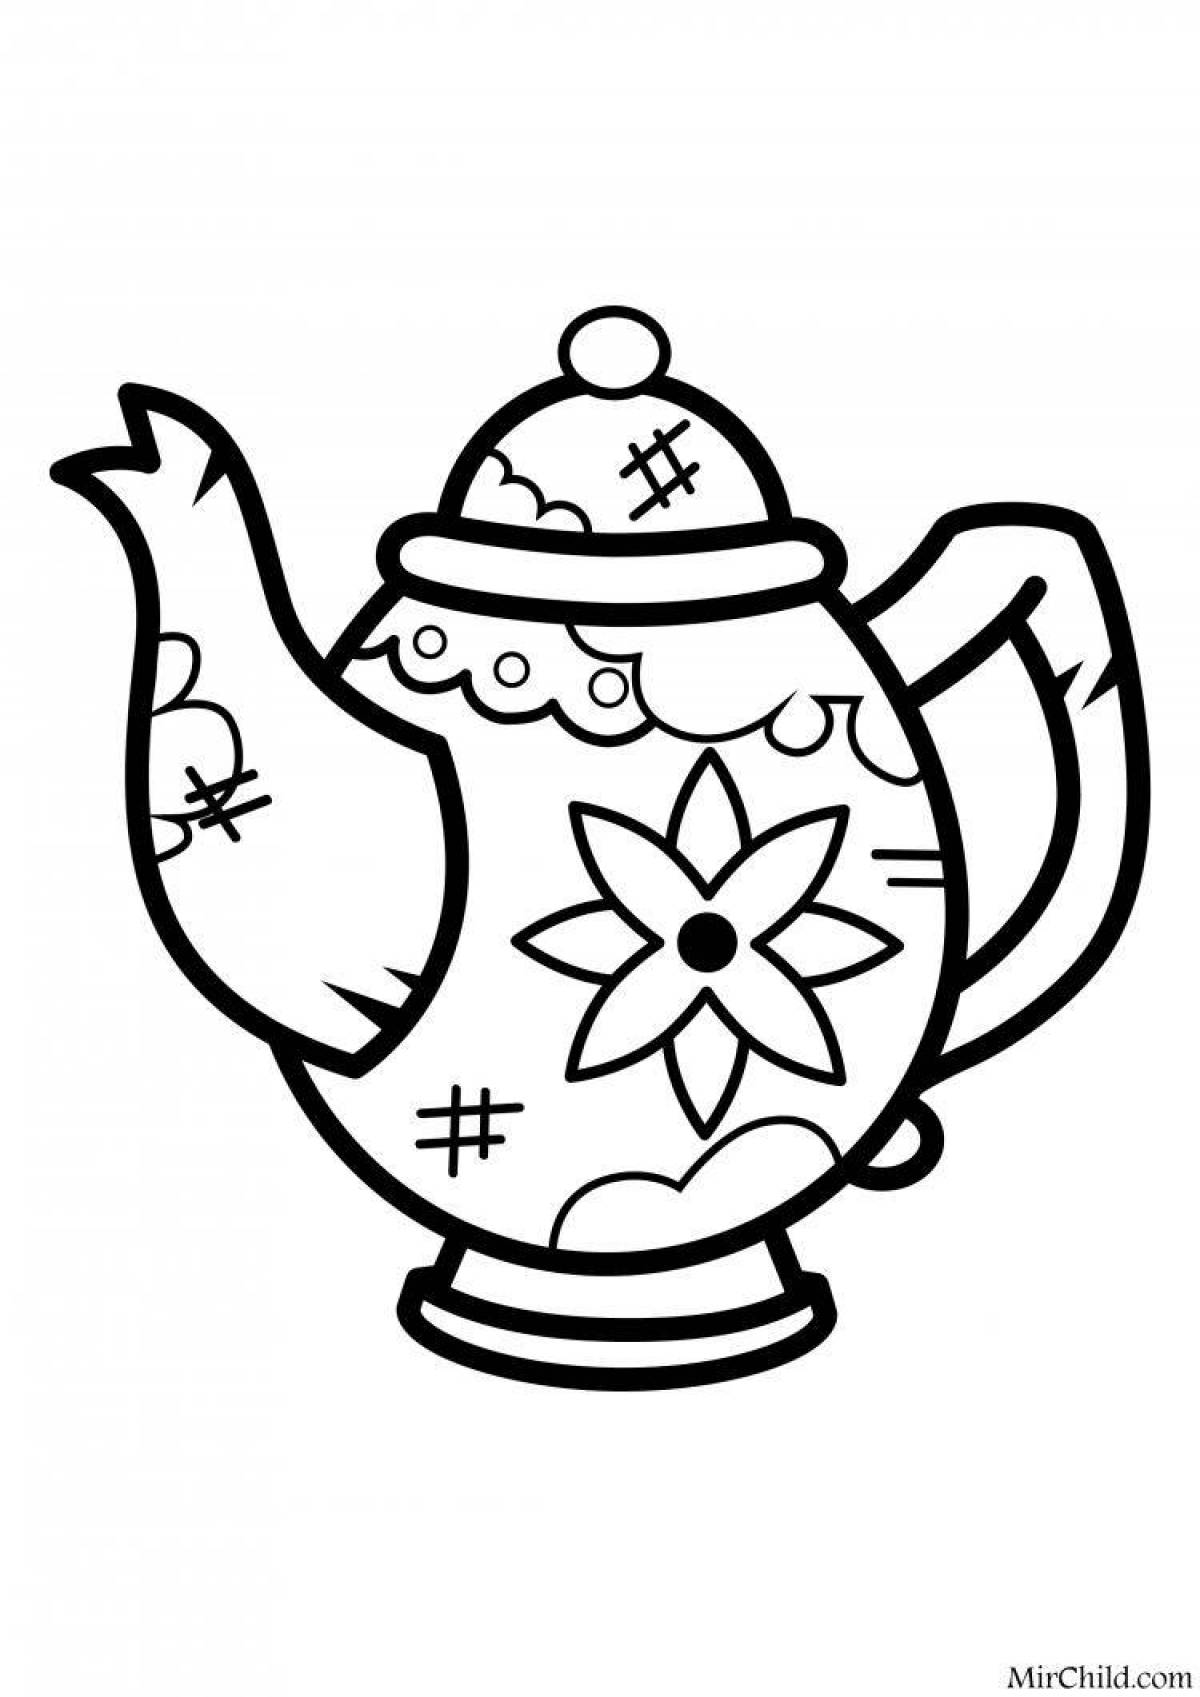 Colorful teapot coloring book for kids